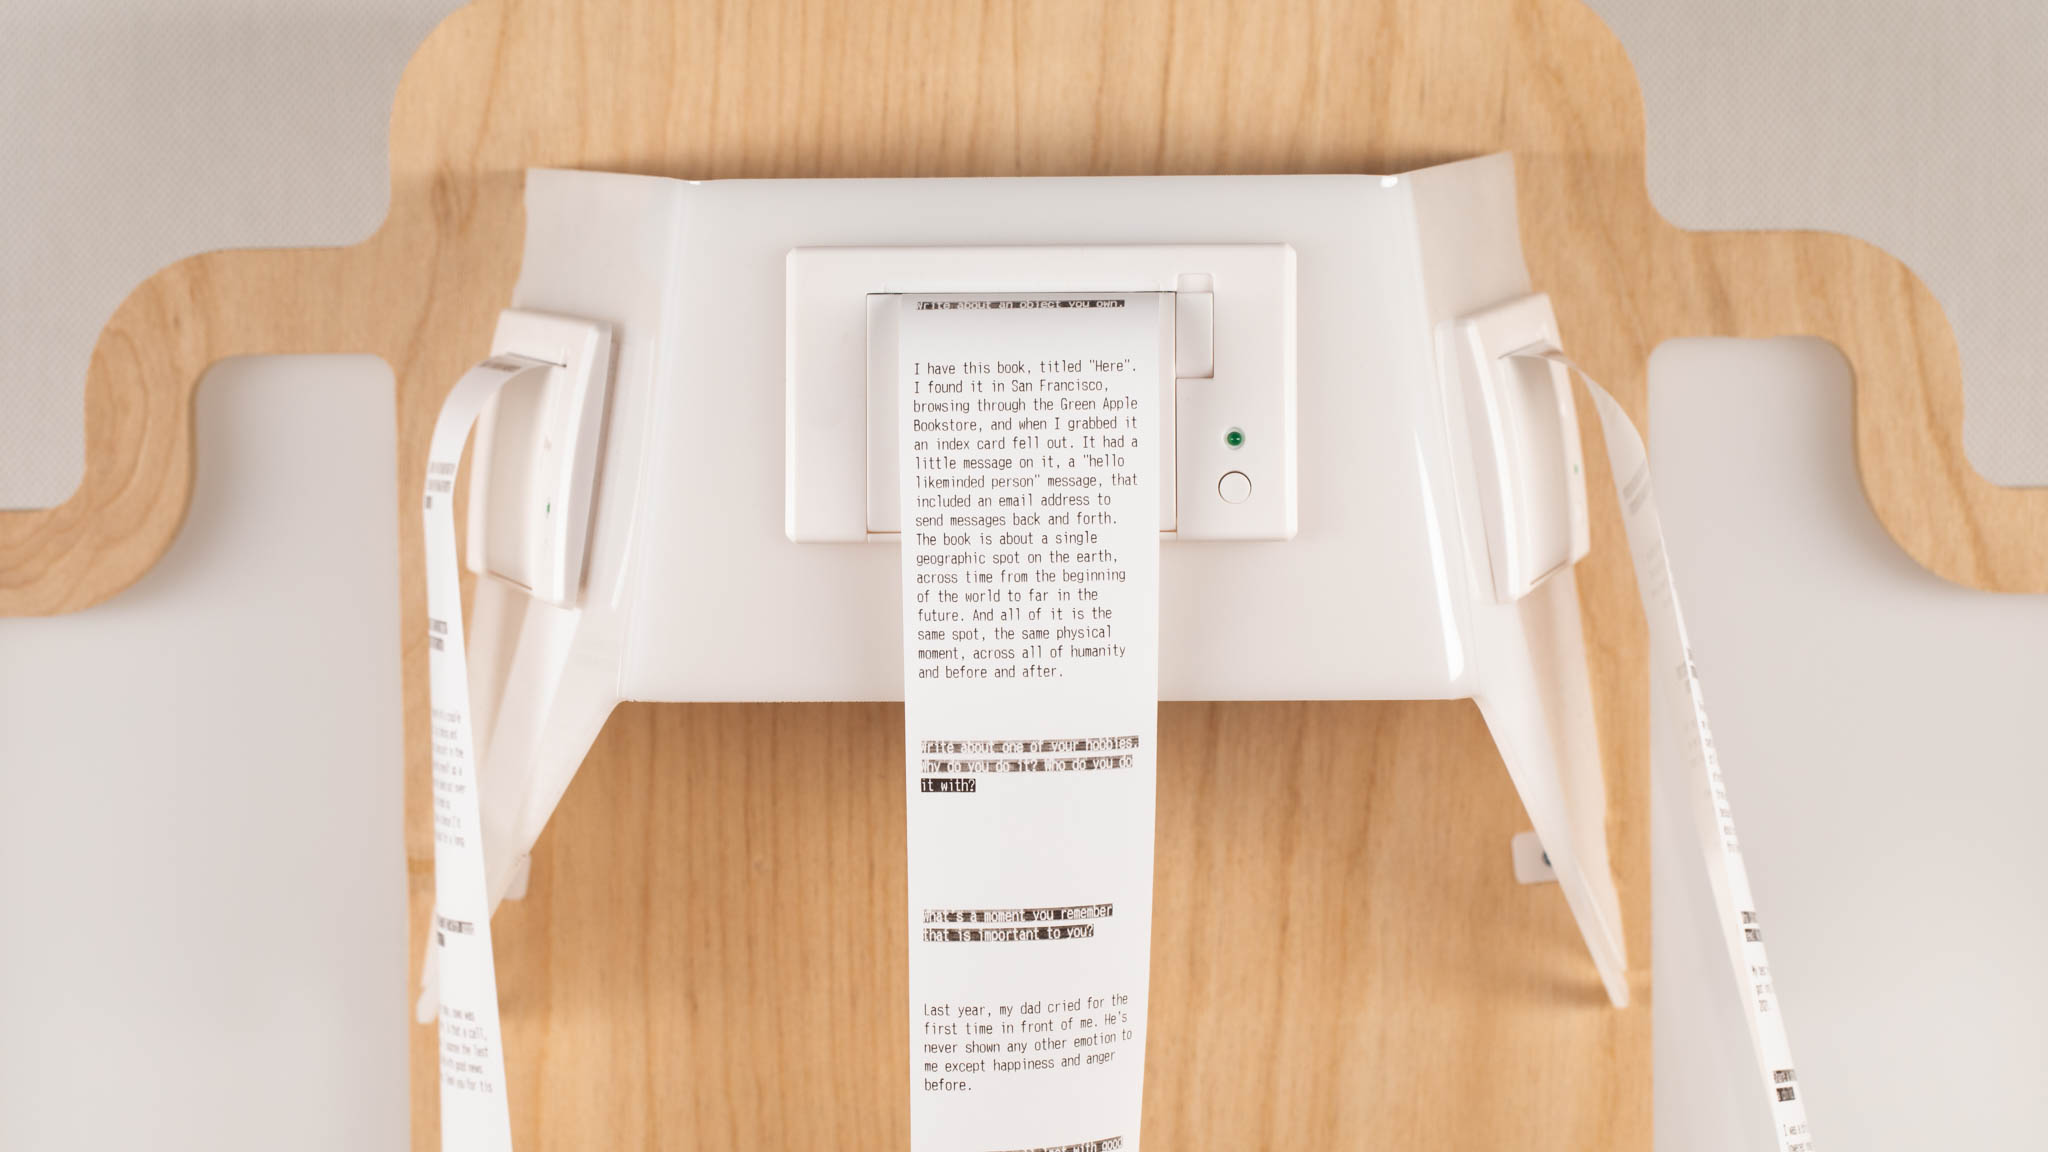 Thermal printer mounted to backboard, printing text onto paper.